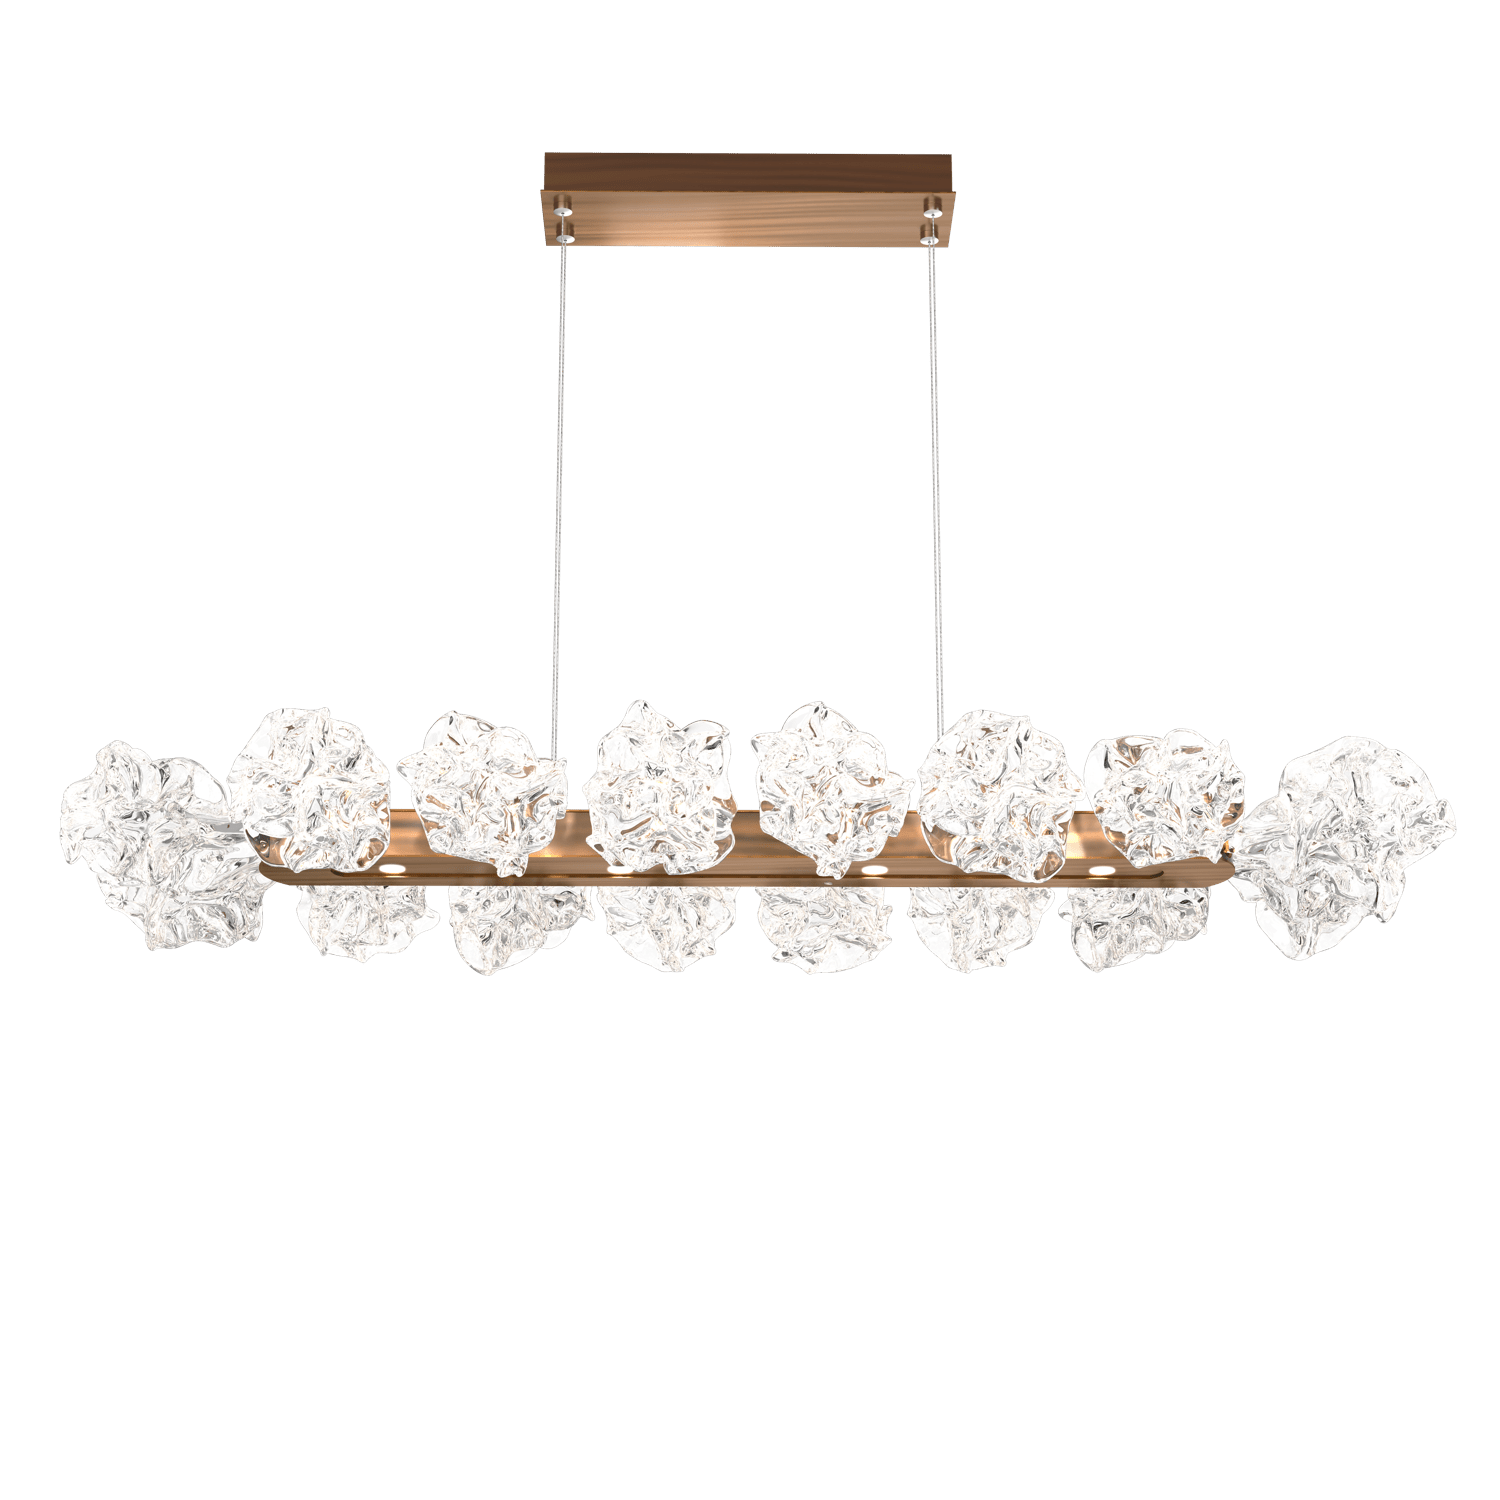 PLB0059-48-RB-Hammerton-Studio-Blossom-48-inch-linear-chandelier-with-oil-rubbed-bronze-finish-and-clear-handblown-crystal-glass-shades-and-LED-lamping